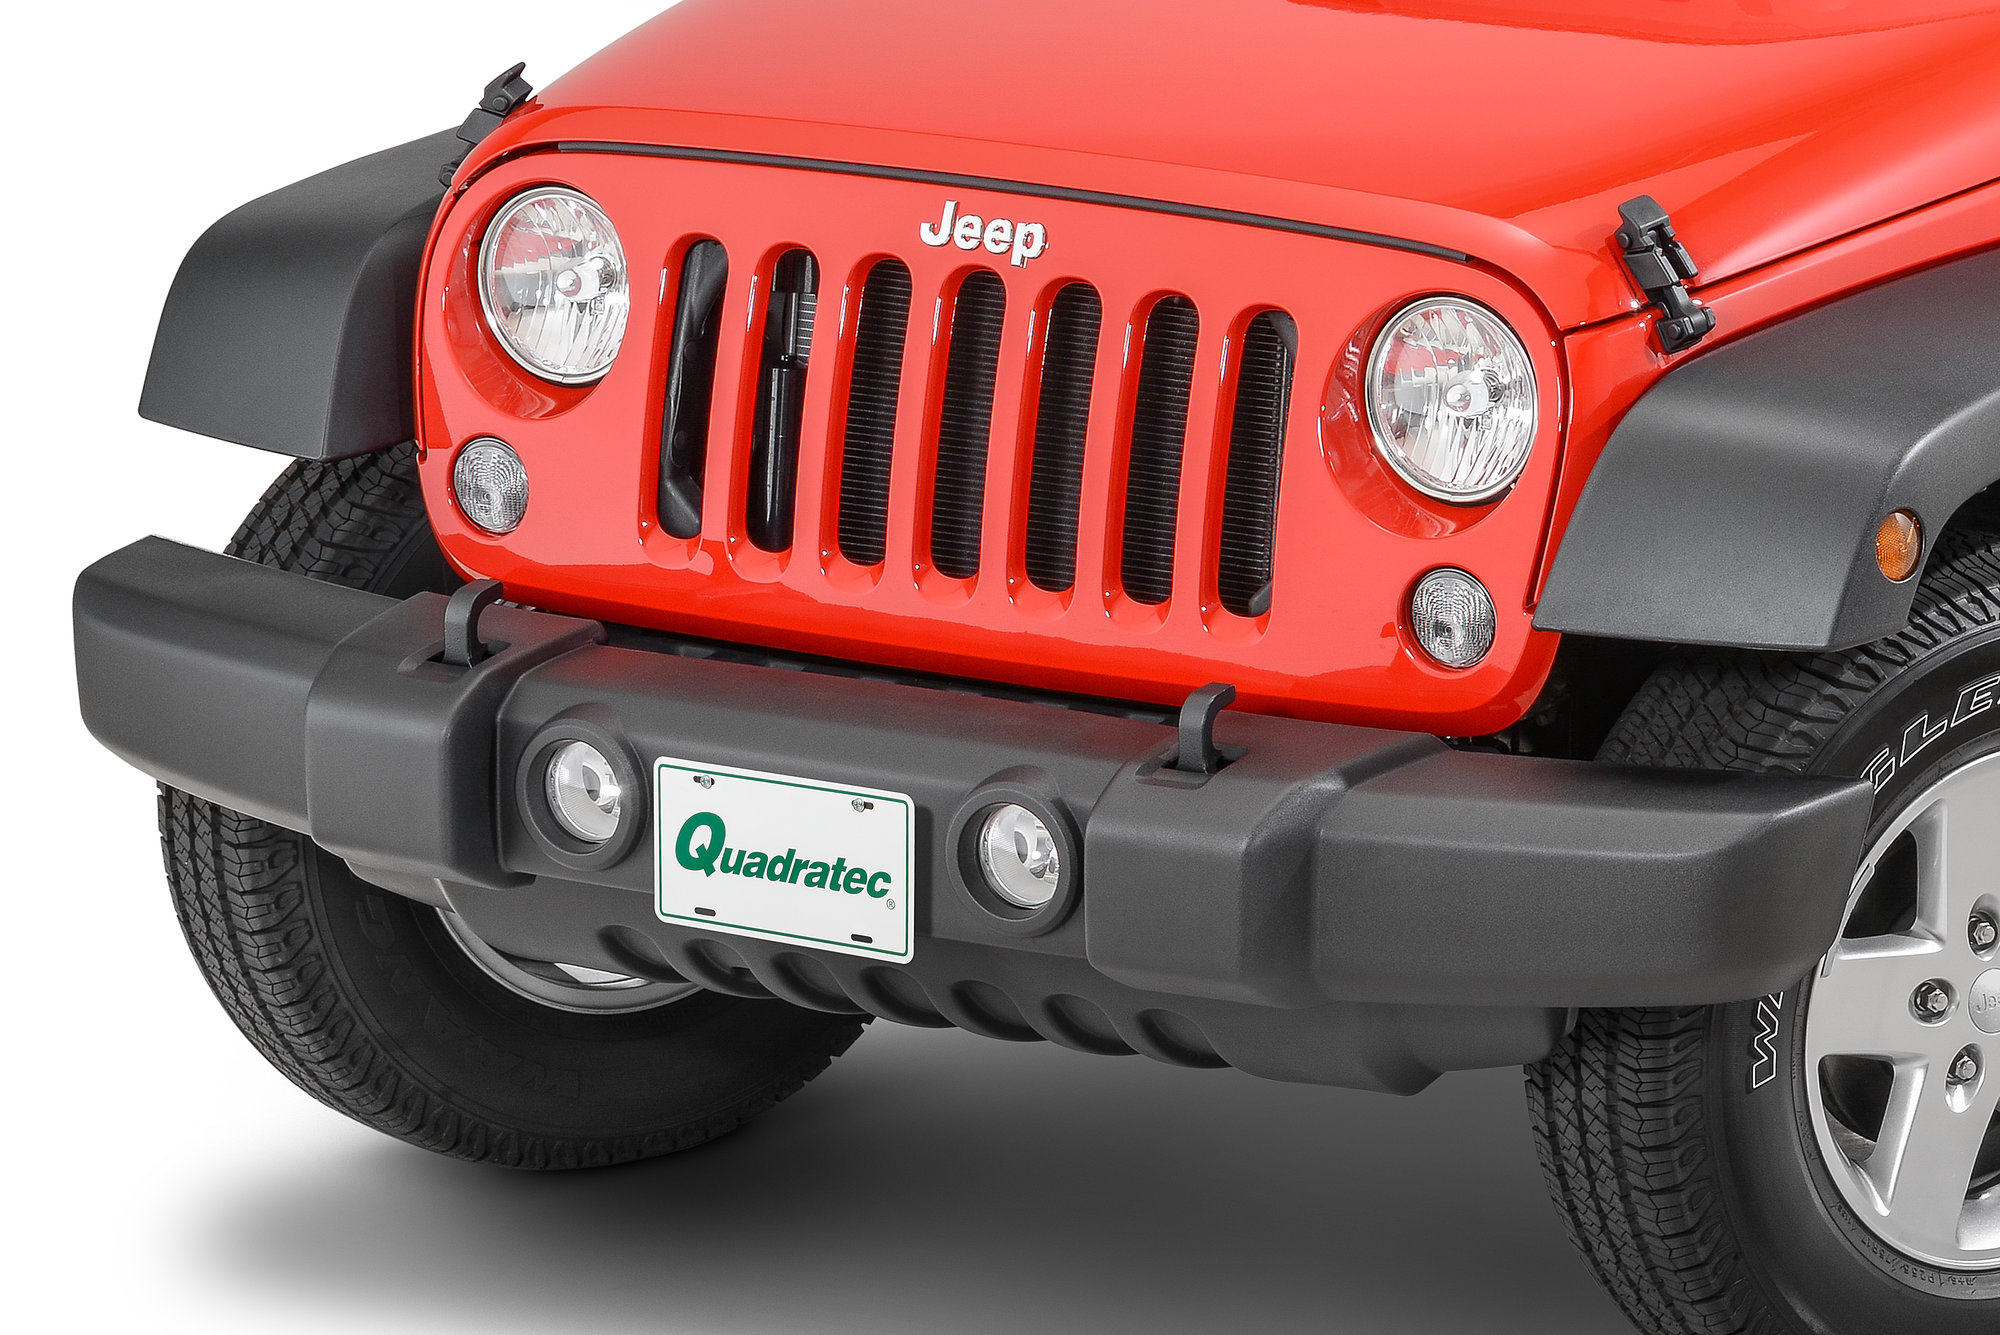 2008-2014 Jeep Wrangler STO-N-SHO Take Off Removable Front License Plate Bracket